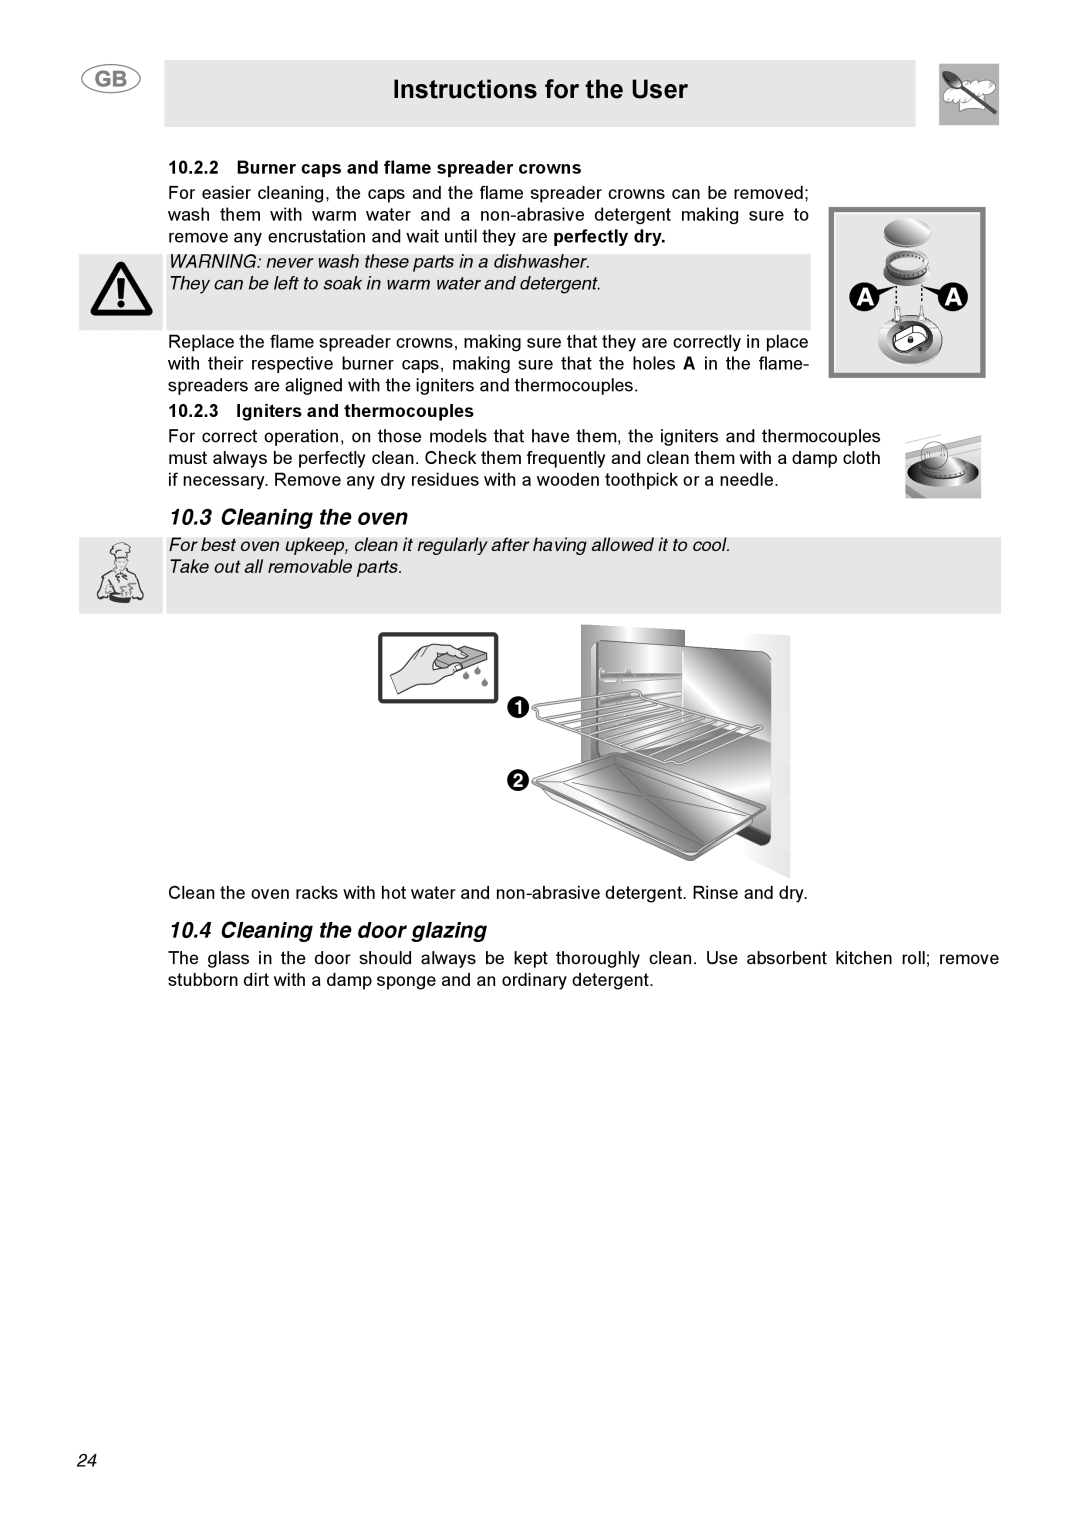 Smeg C9GGSSA manual Cleaning the oven, Cleaning the door glazing, Instructions for the User, Igniters and thermocouples 